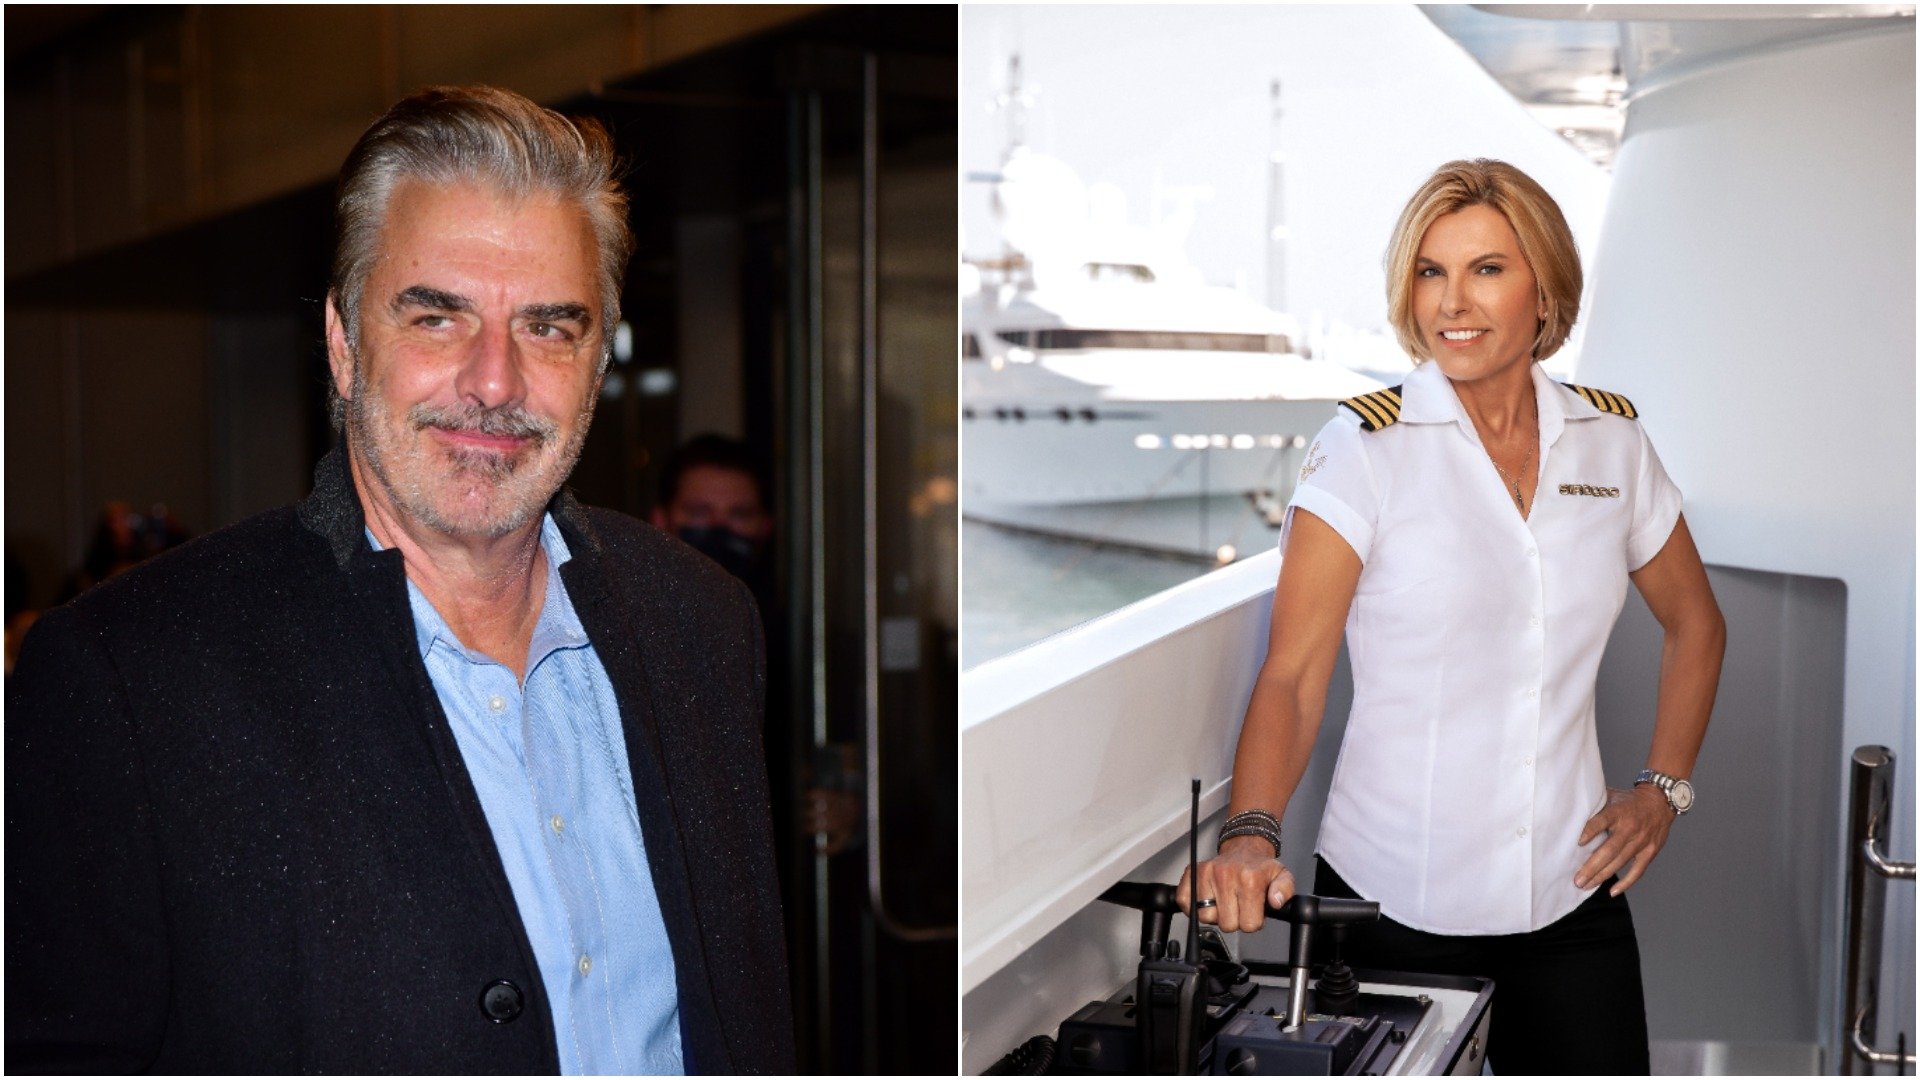 Chris Noth arrives at the At Just Like That ... premiere and Captain Sandy Yawn poses for a Below Deck Mediterranean cast photo